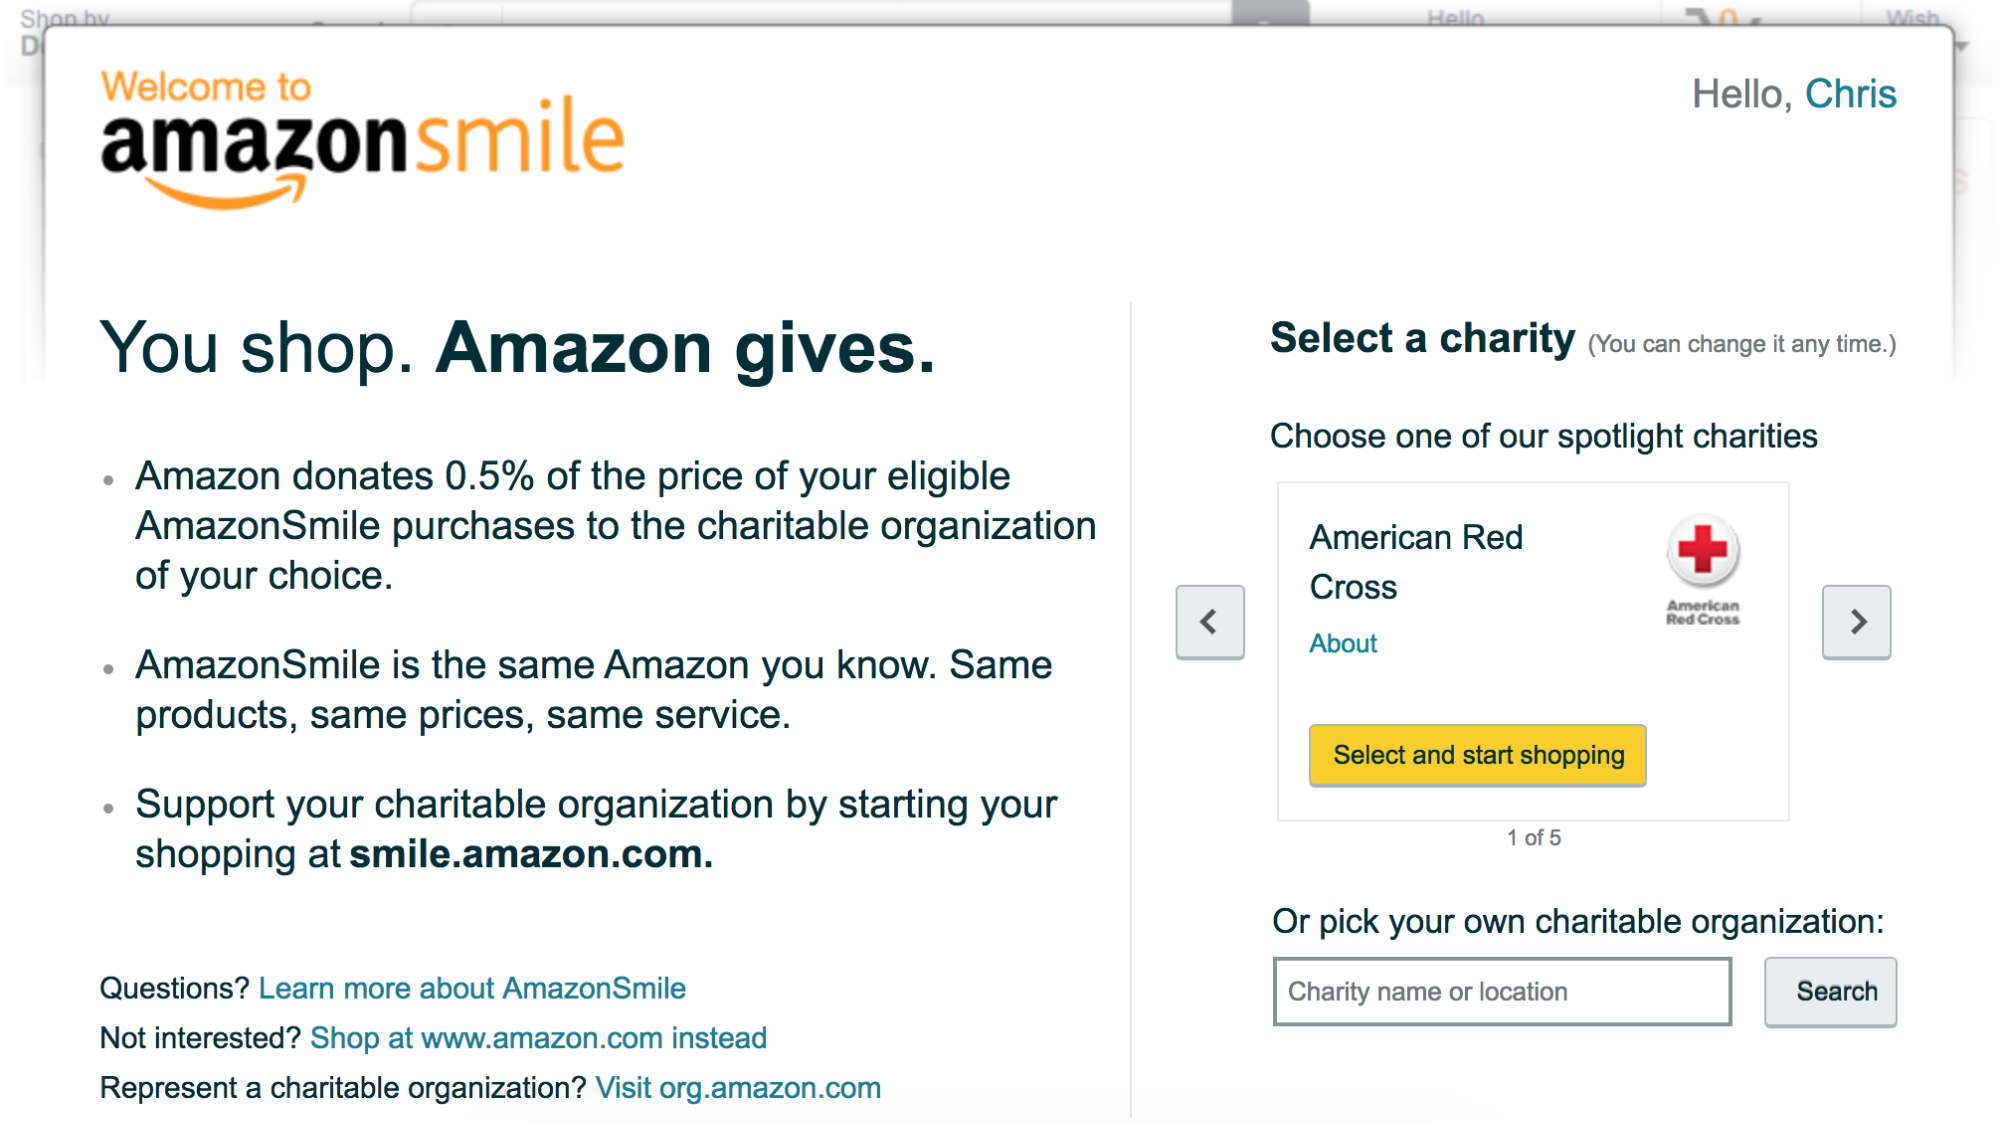 Screenshot showing an email about amazon smile